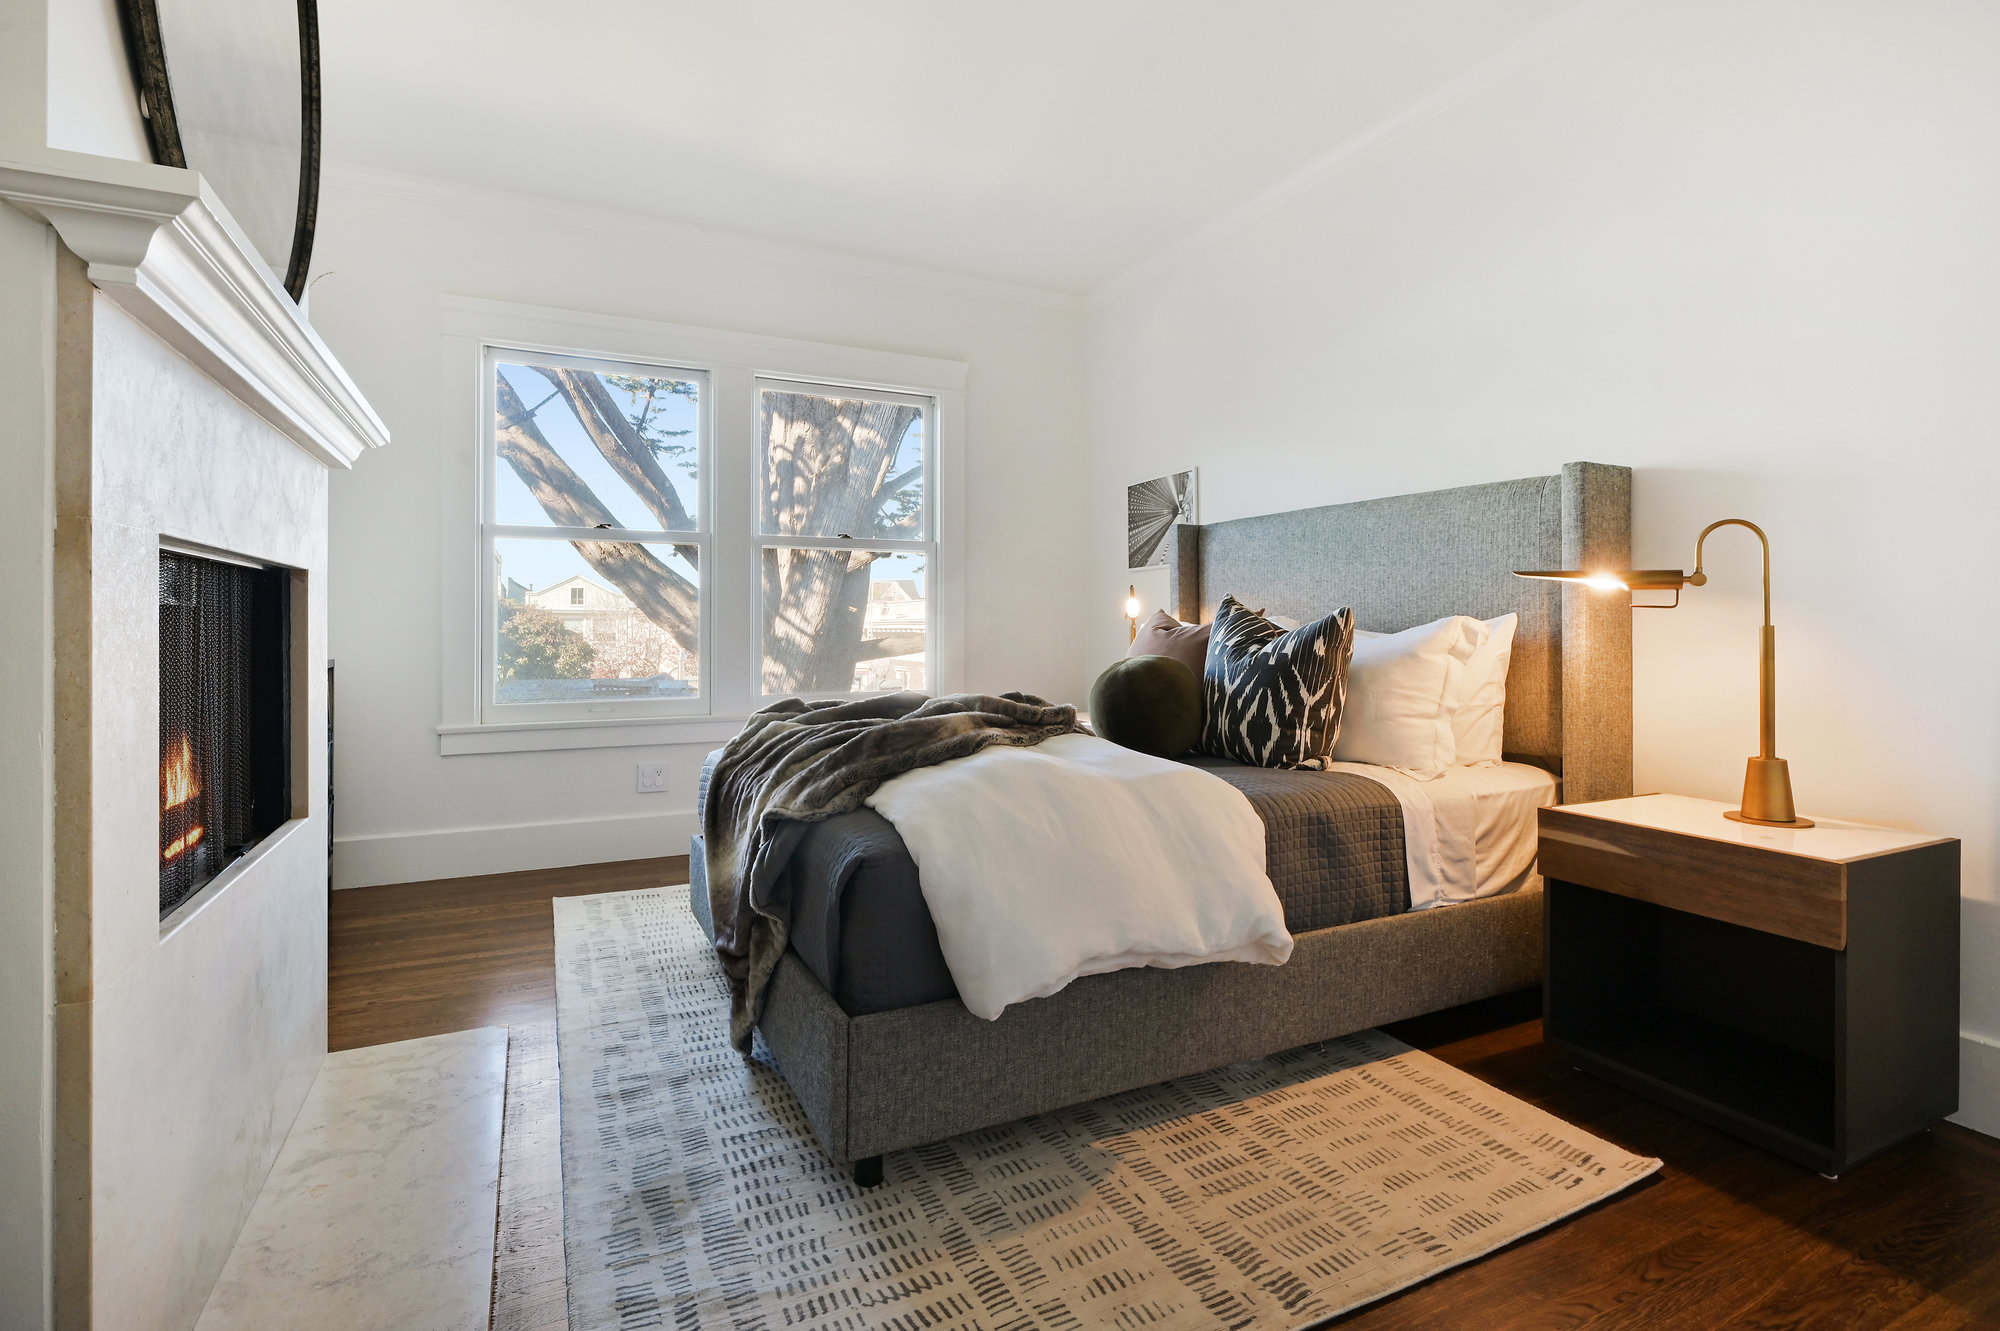 Property Photo: Bedroom featuring large windows and wood floors